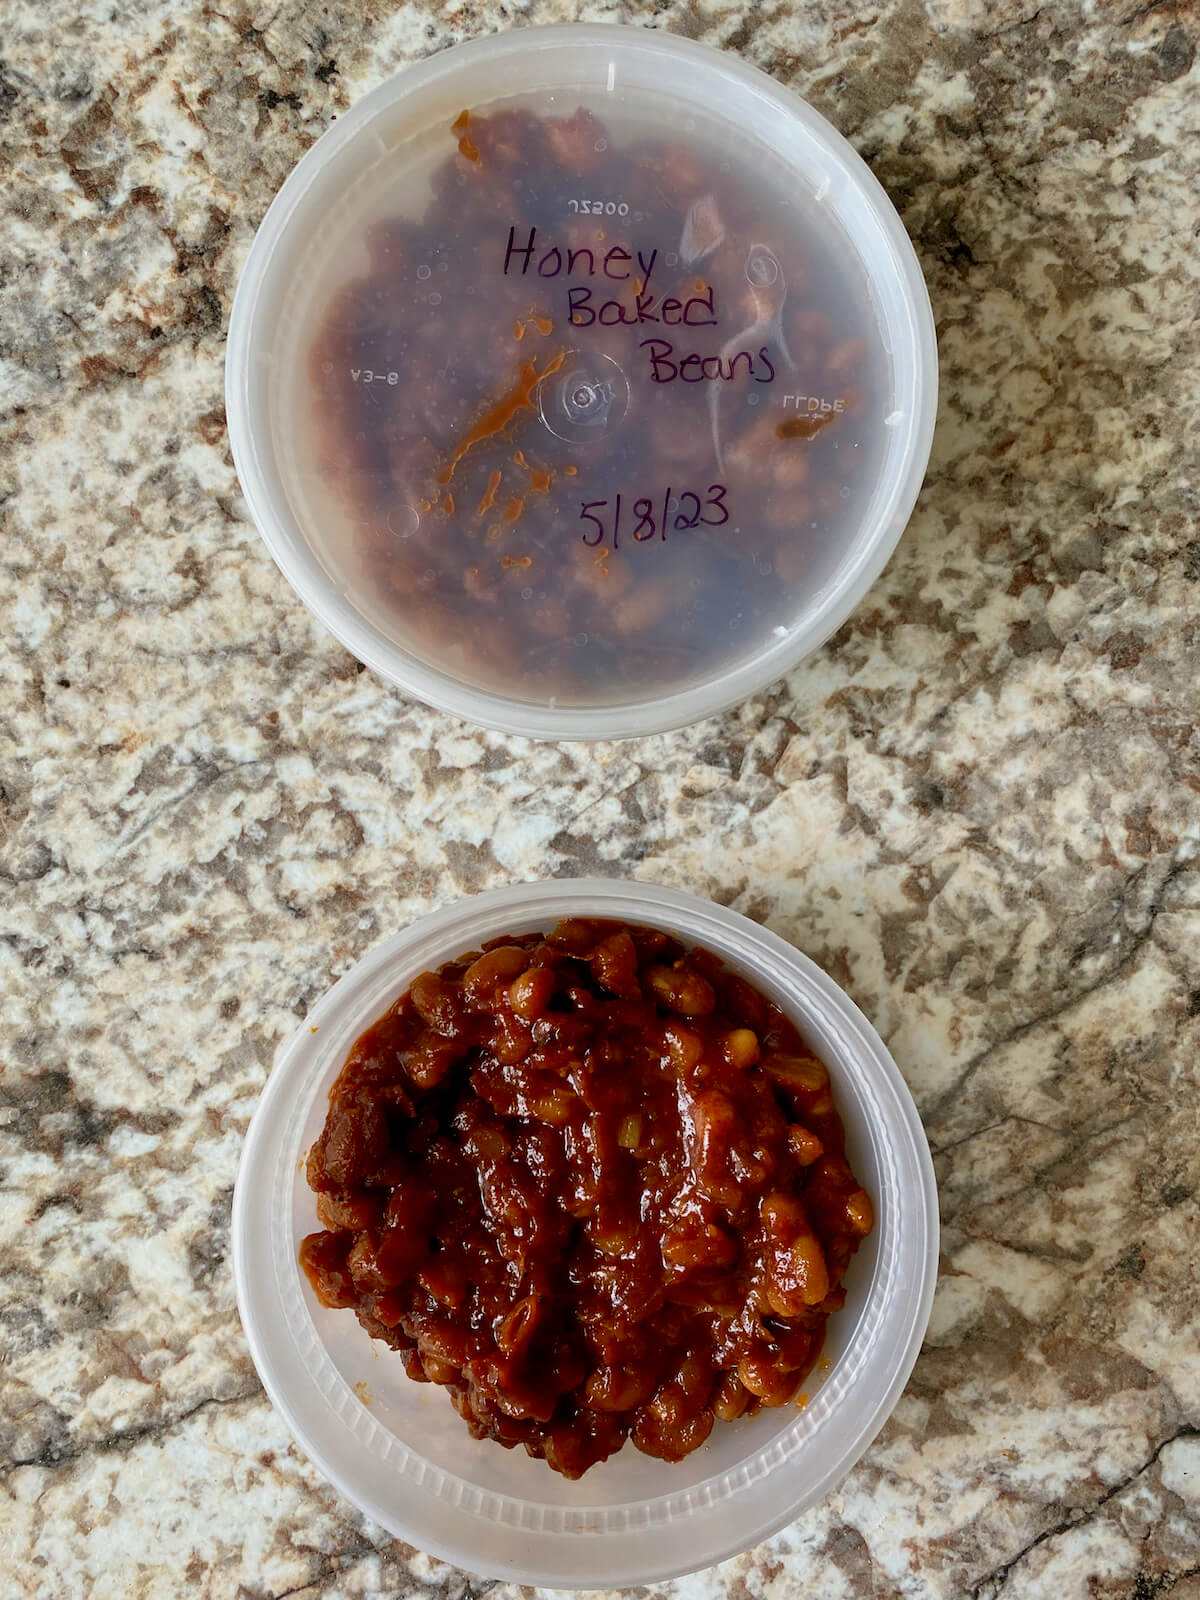 Two round plastic storage containers filled with homemade baked beans. One container has a lid on it that's labeled "Honey Baked Beans, 5/8/23."